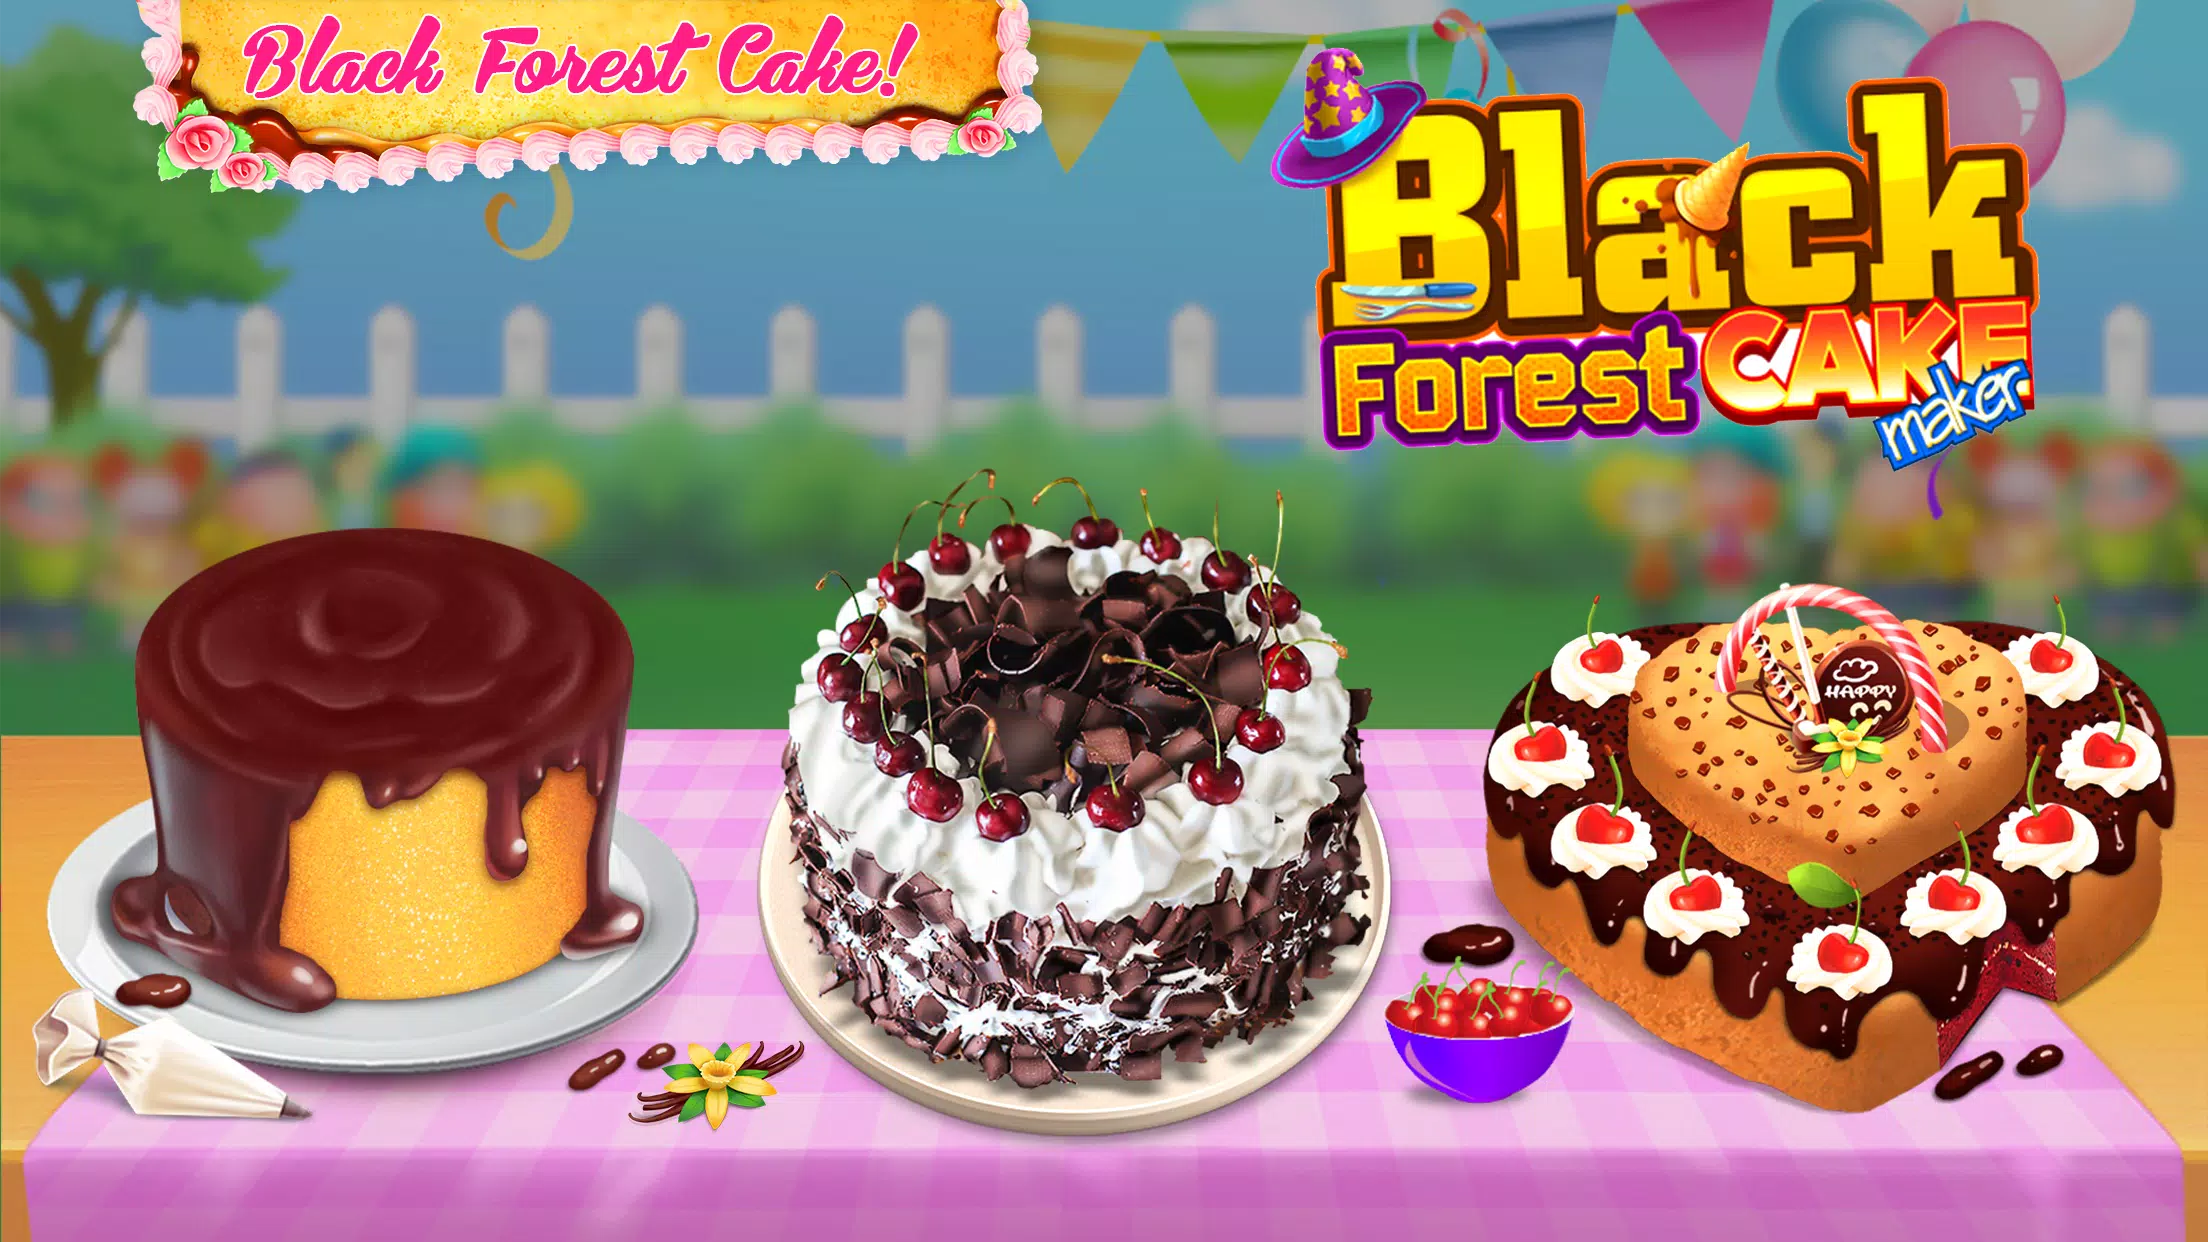 Bake A Cake : Cooking Games APK for Android Download